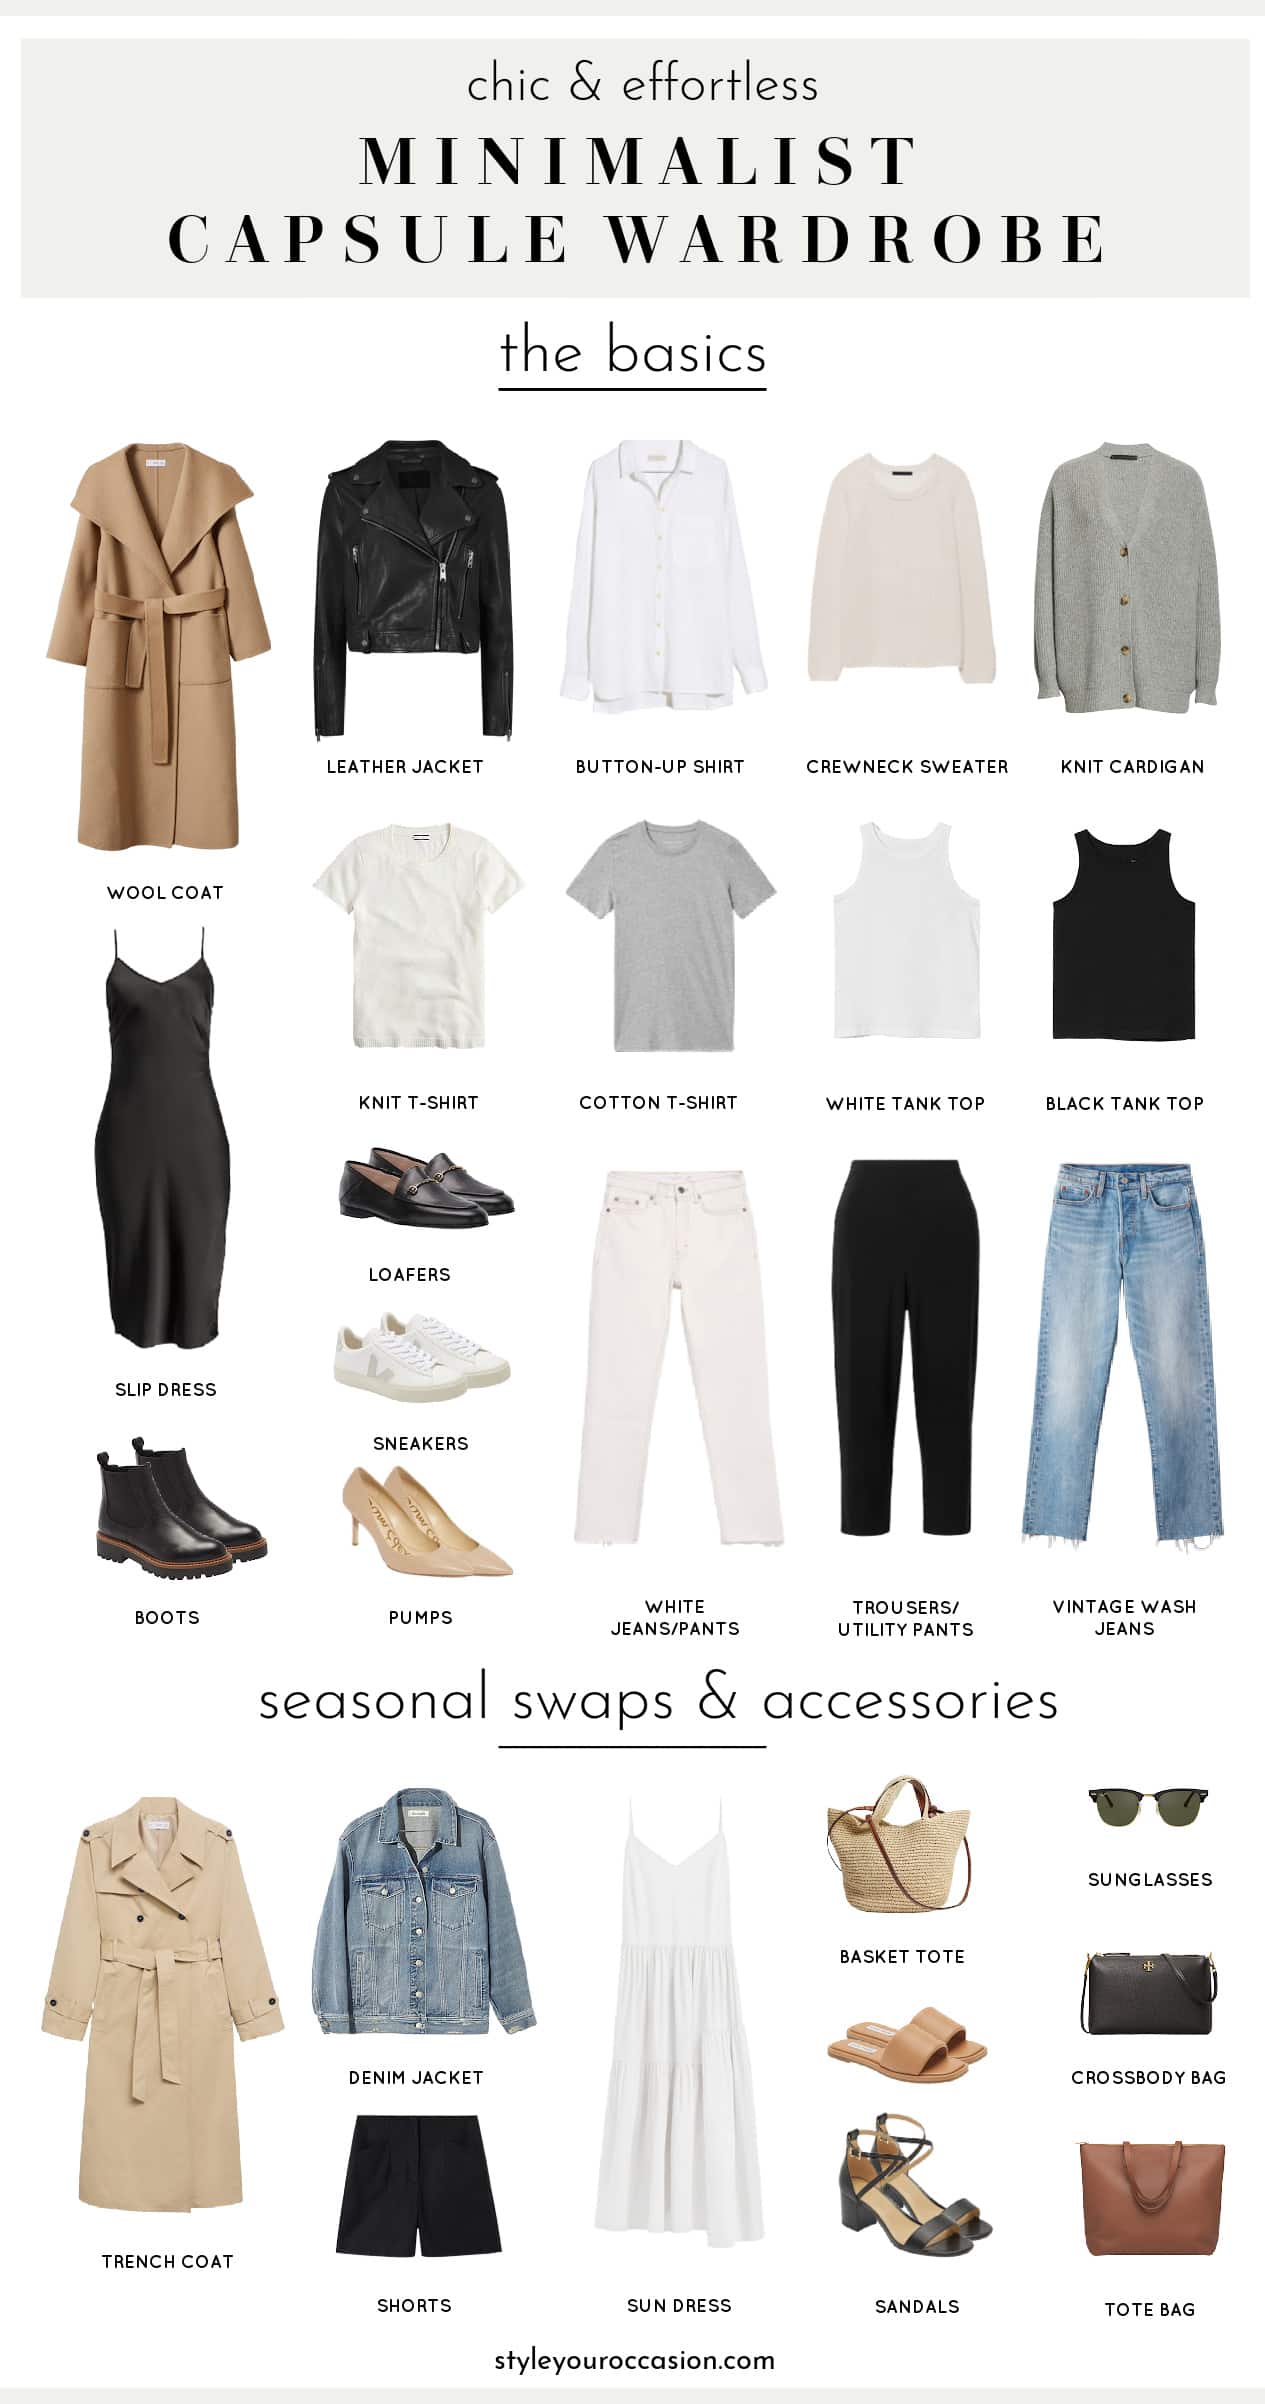 image of a collage of neutral and stylish clothing for women for a minimal wardrobe capsule